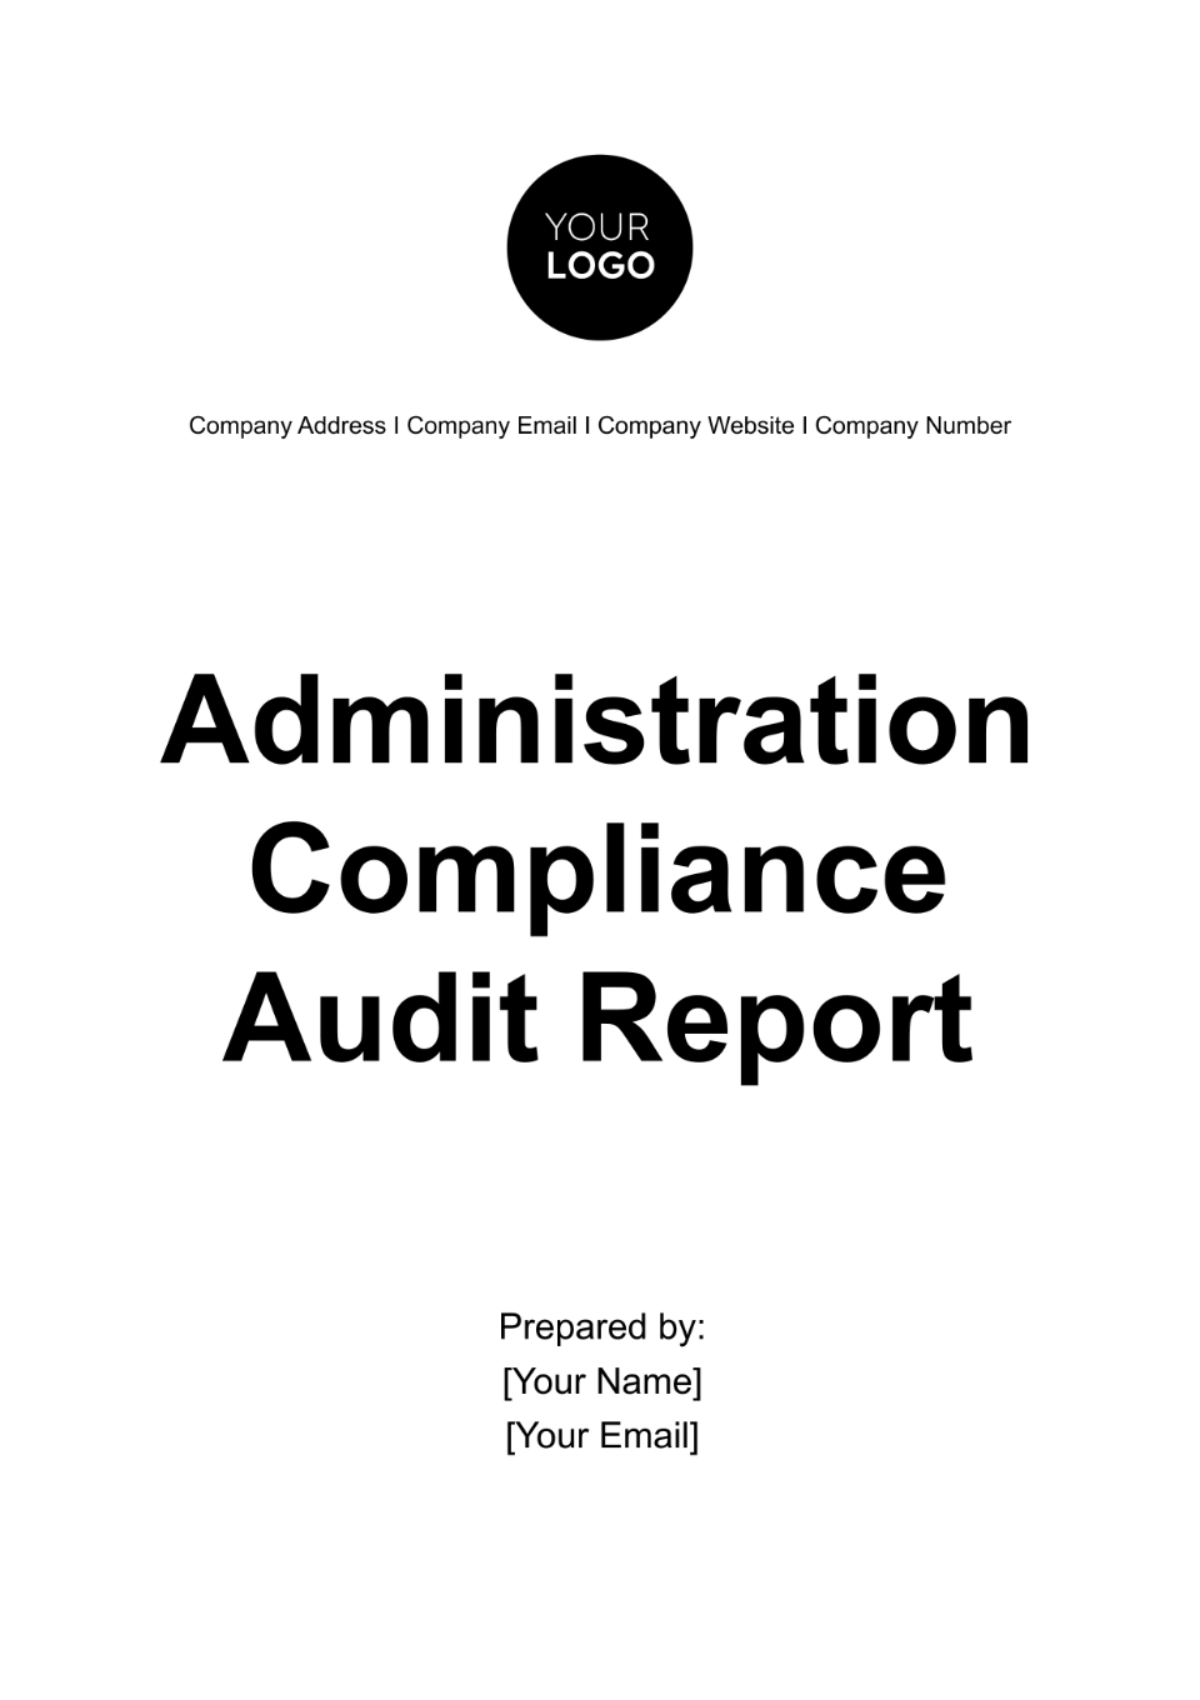 Administration Compliance Audit Report Template